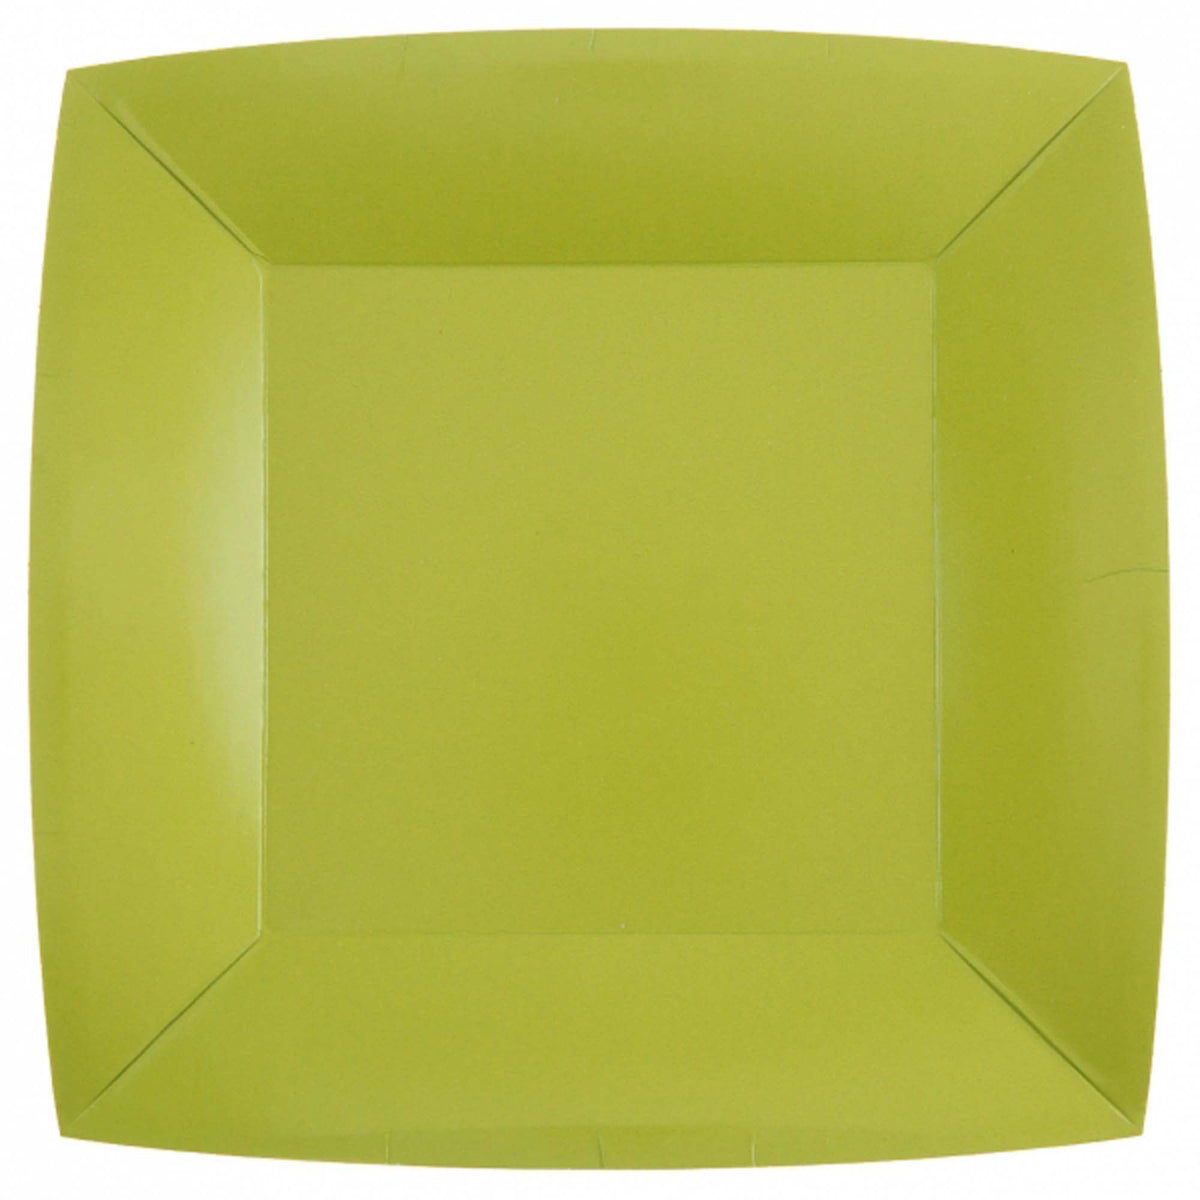 SANTEX Everyday Entertaining Kiwi Green Large Square Lunch Party Paper Plates, 9 Inches, 10 Count 3660380072164